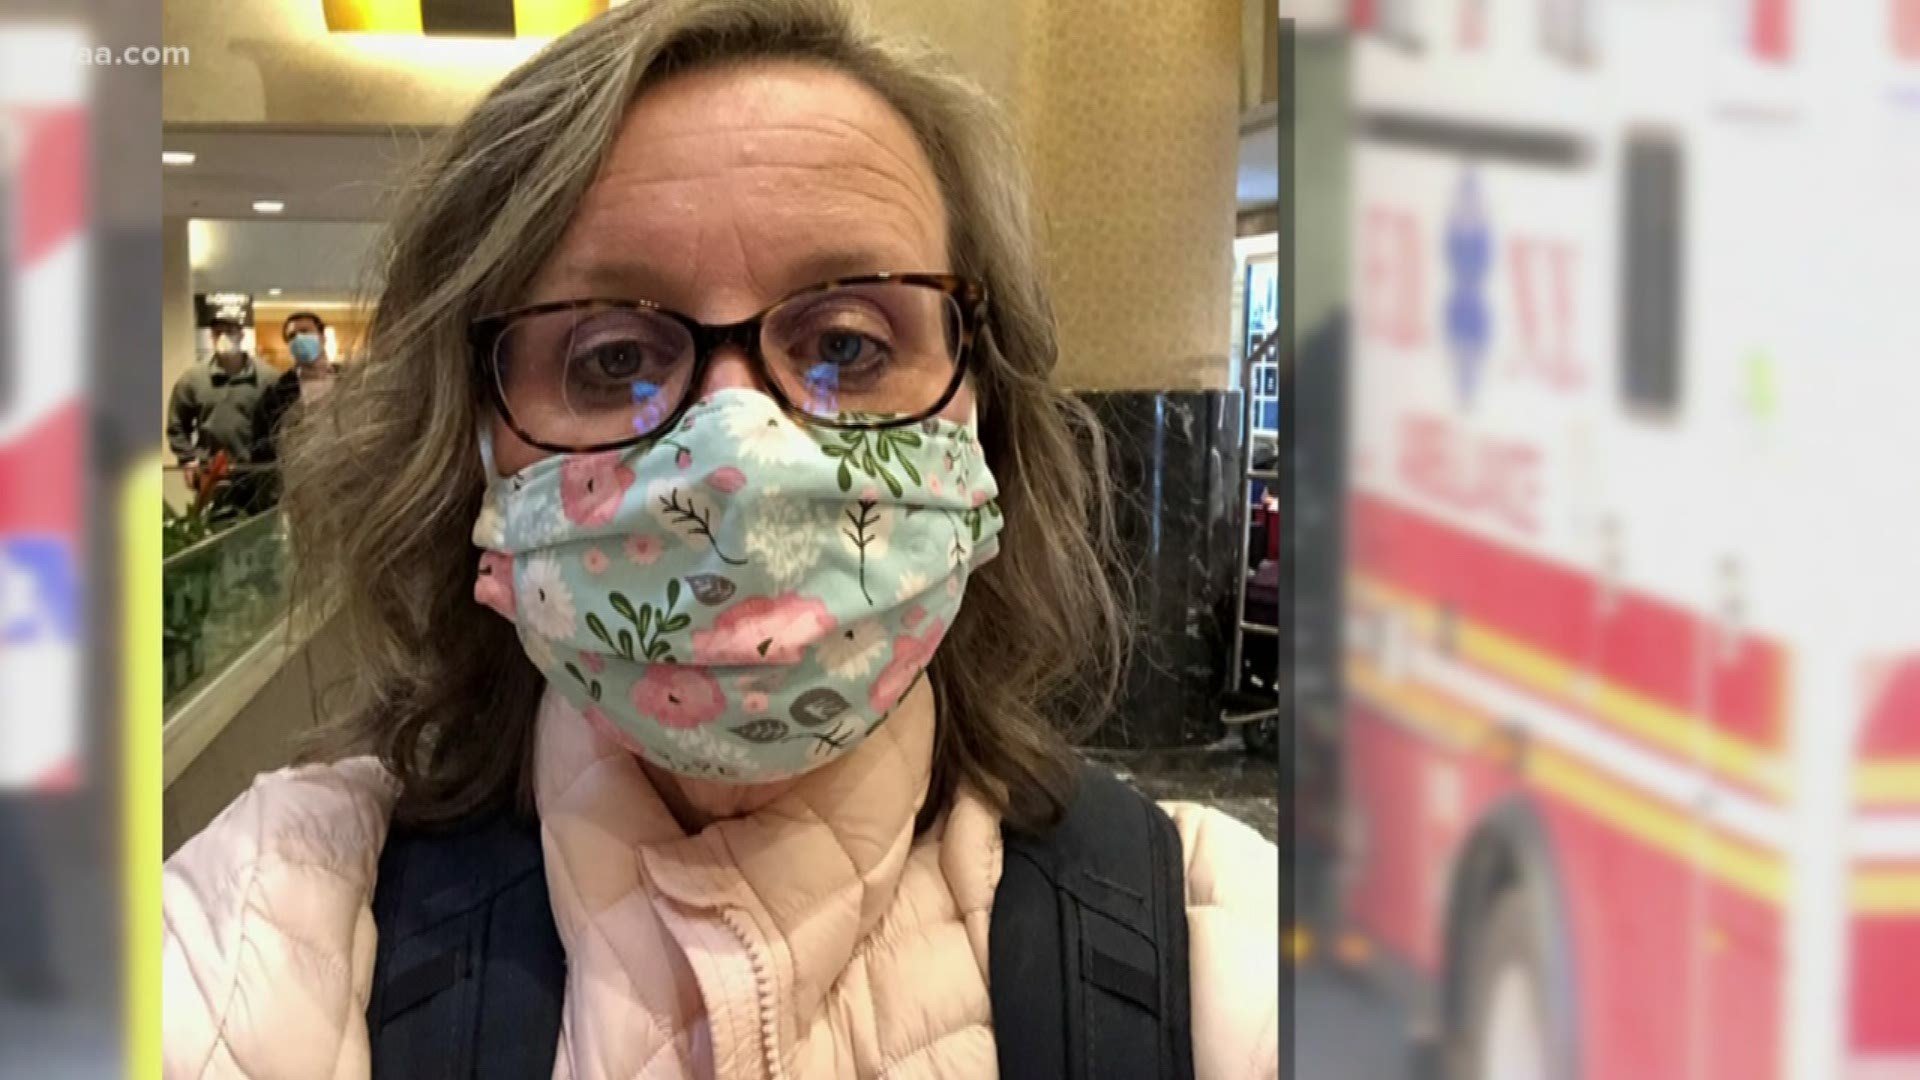 Angie Layman of Godley traveled to NYC this week after feeling an obligation to help other nurses in the pandemic fight